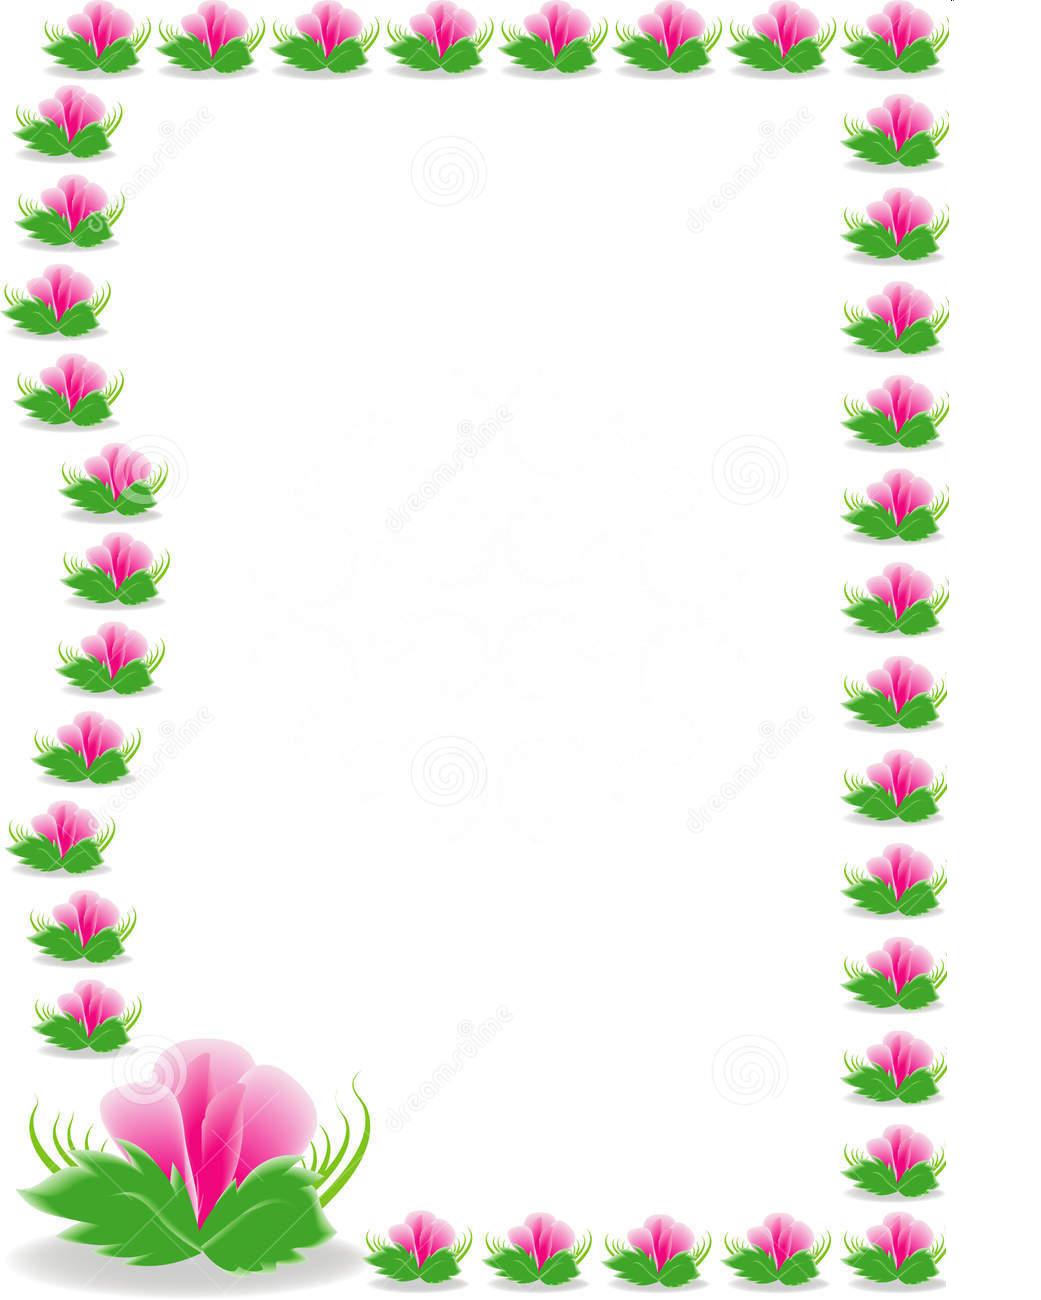 Pink and Green Flower Border 1041x1300